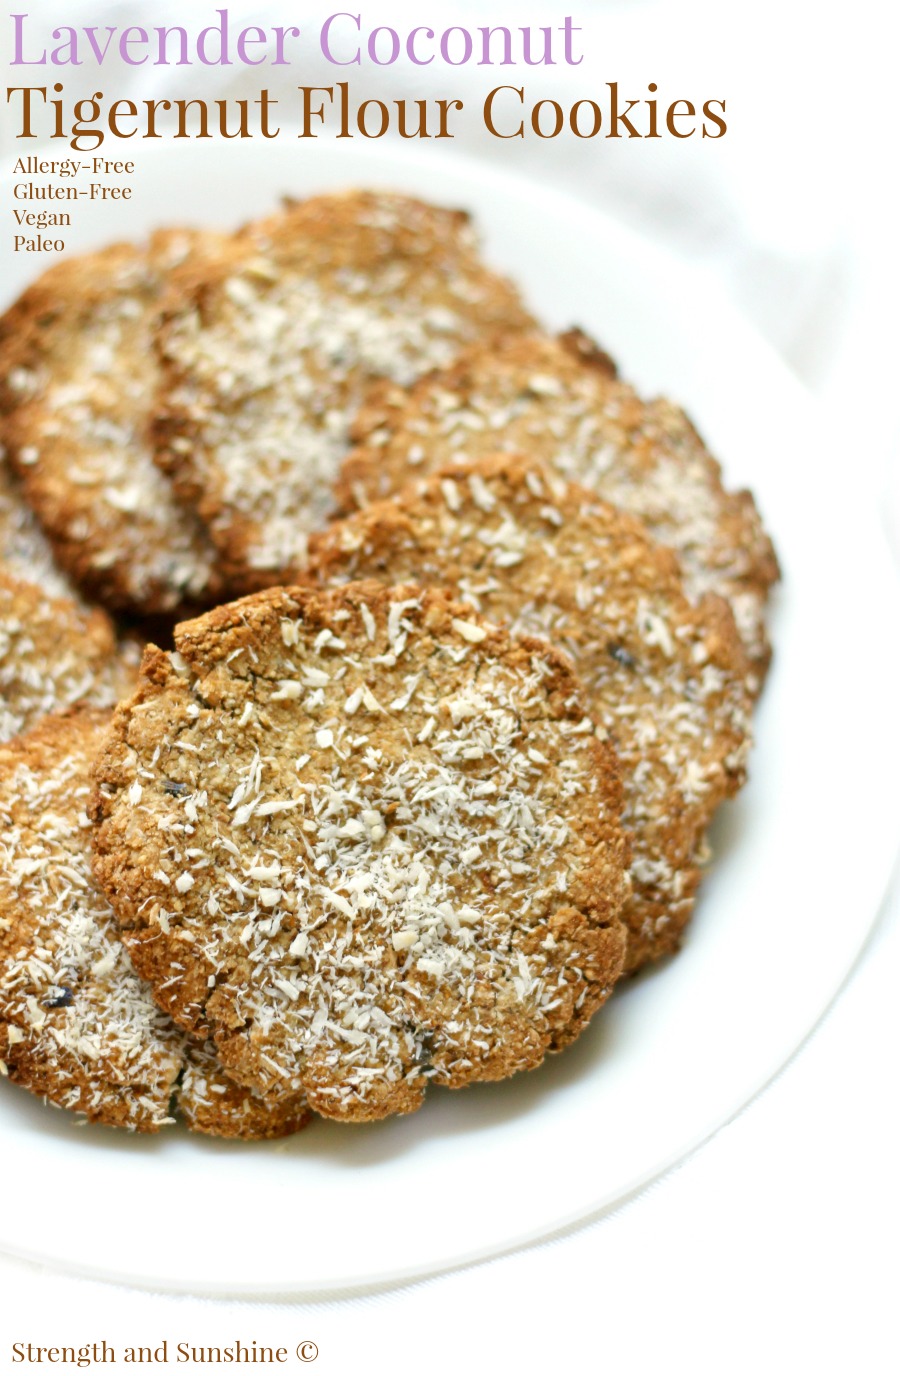 Lavender Coconut Tigernut Flour Cookies (Gluten-Free, Vegan, Paleo) | Strength and Sunshine @RebeccaGF666 Sweet, nutty, and earthy, these Lavender Coconut Tigernut Flour Cookies are an alluring and delicious treat to bake! Gluten-free, vegan, paleo, and allergy-free, whether you enjoy them as a snack with afternoon tea or a healthy dessert, this recipe is bound to be a new favorite!